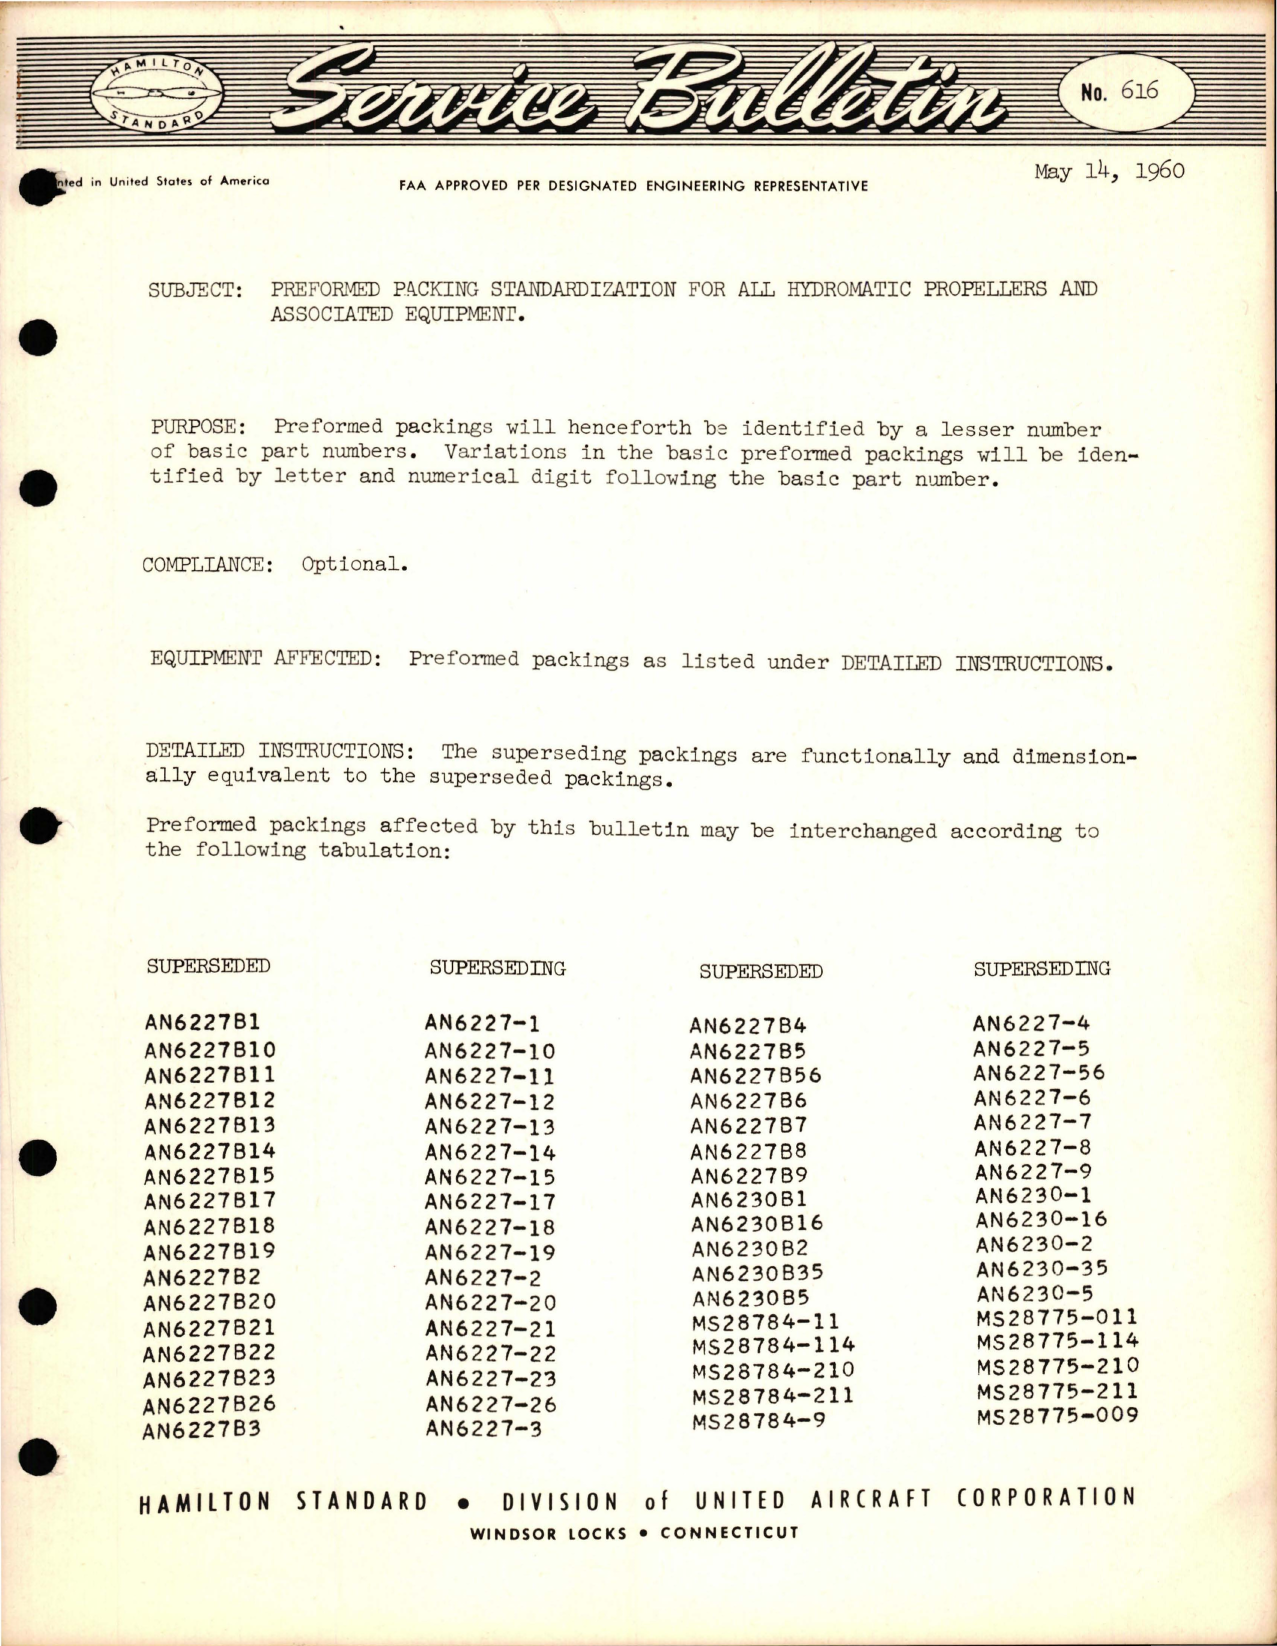 Sample page 1 from AirCorps Library document: Preformed Packing Standardization for all Hydromatic Propellers and Associated Equipment